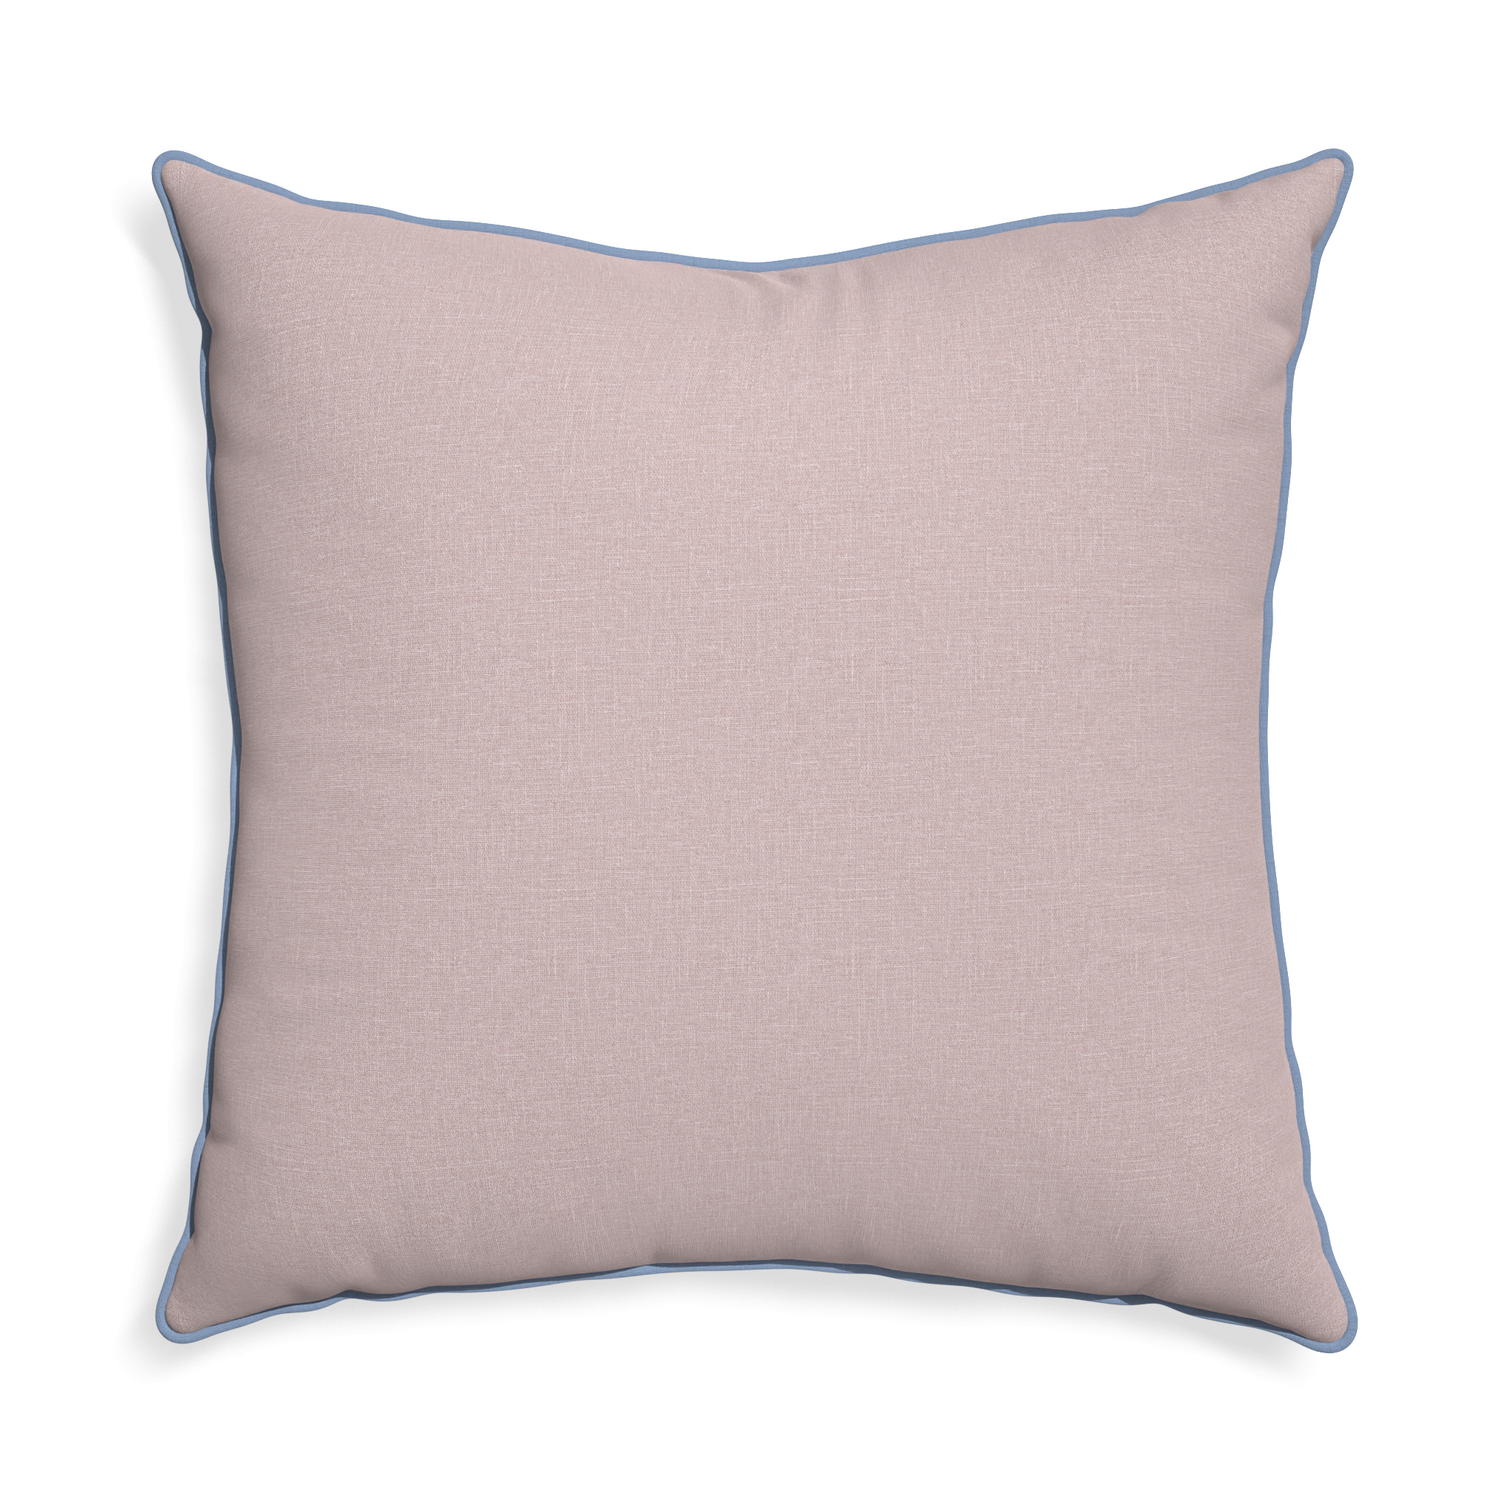 Euro-sham orchid custom mauve pinkpillow with sky piping on white background